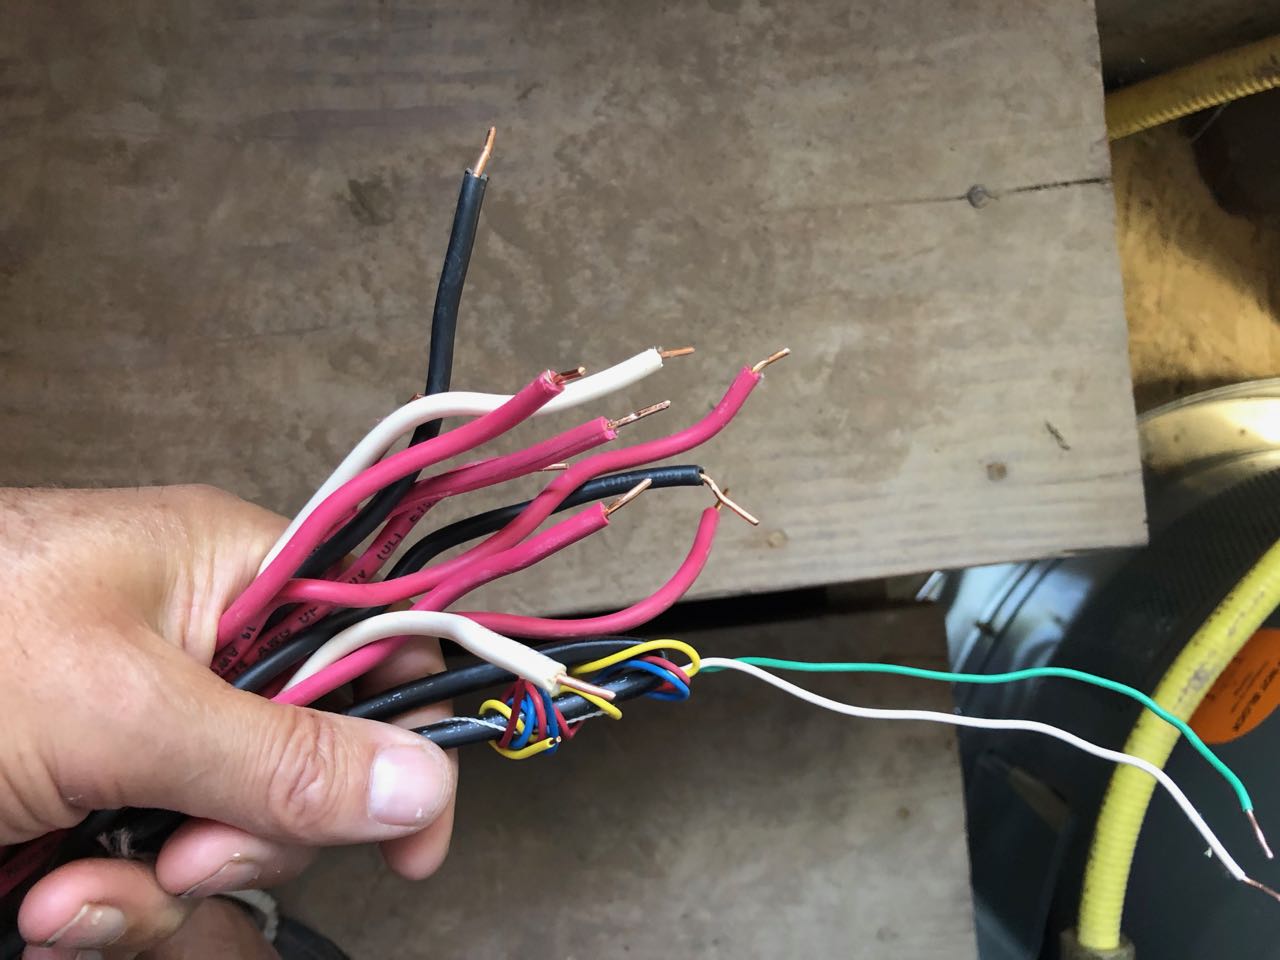 Hooking up my Rachio 3, wiring questions - Wiring - Rachio Community